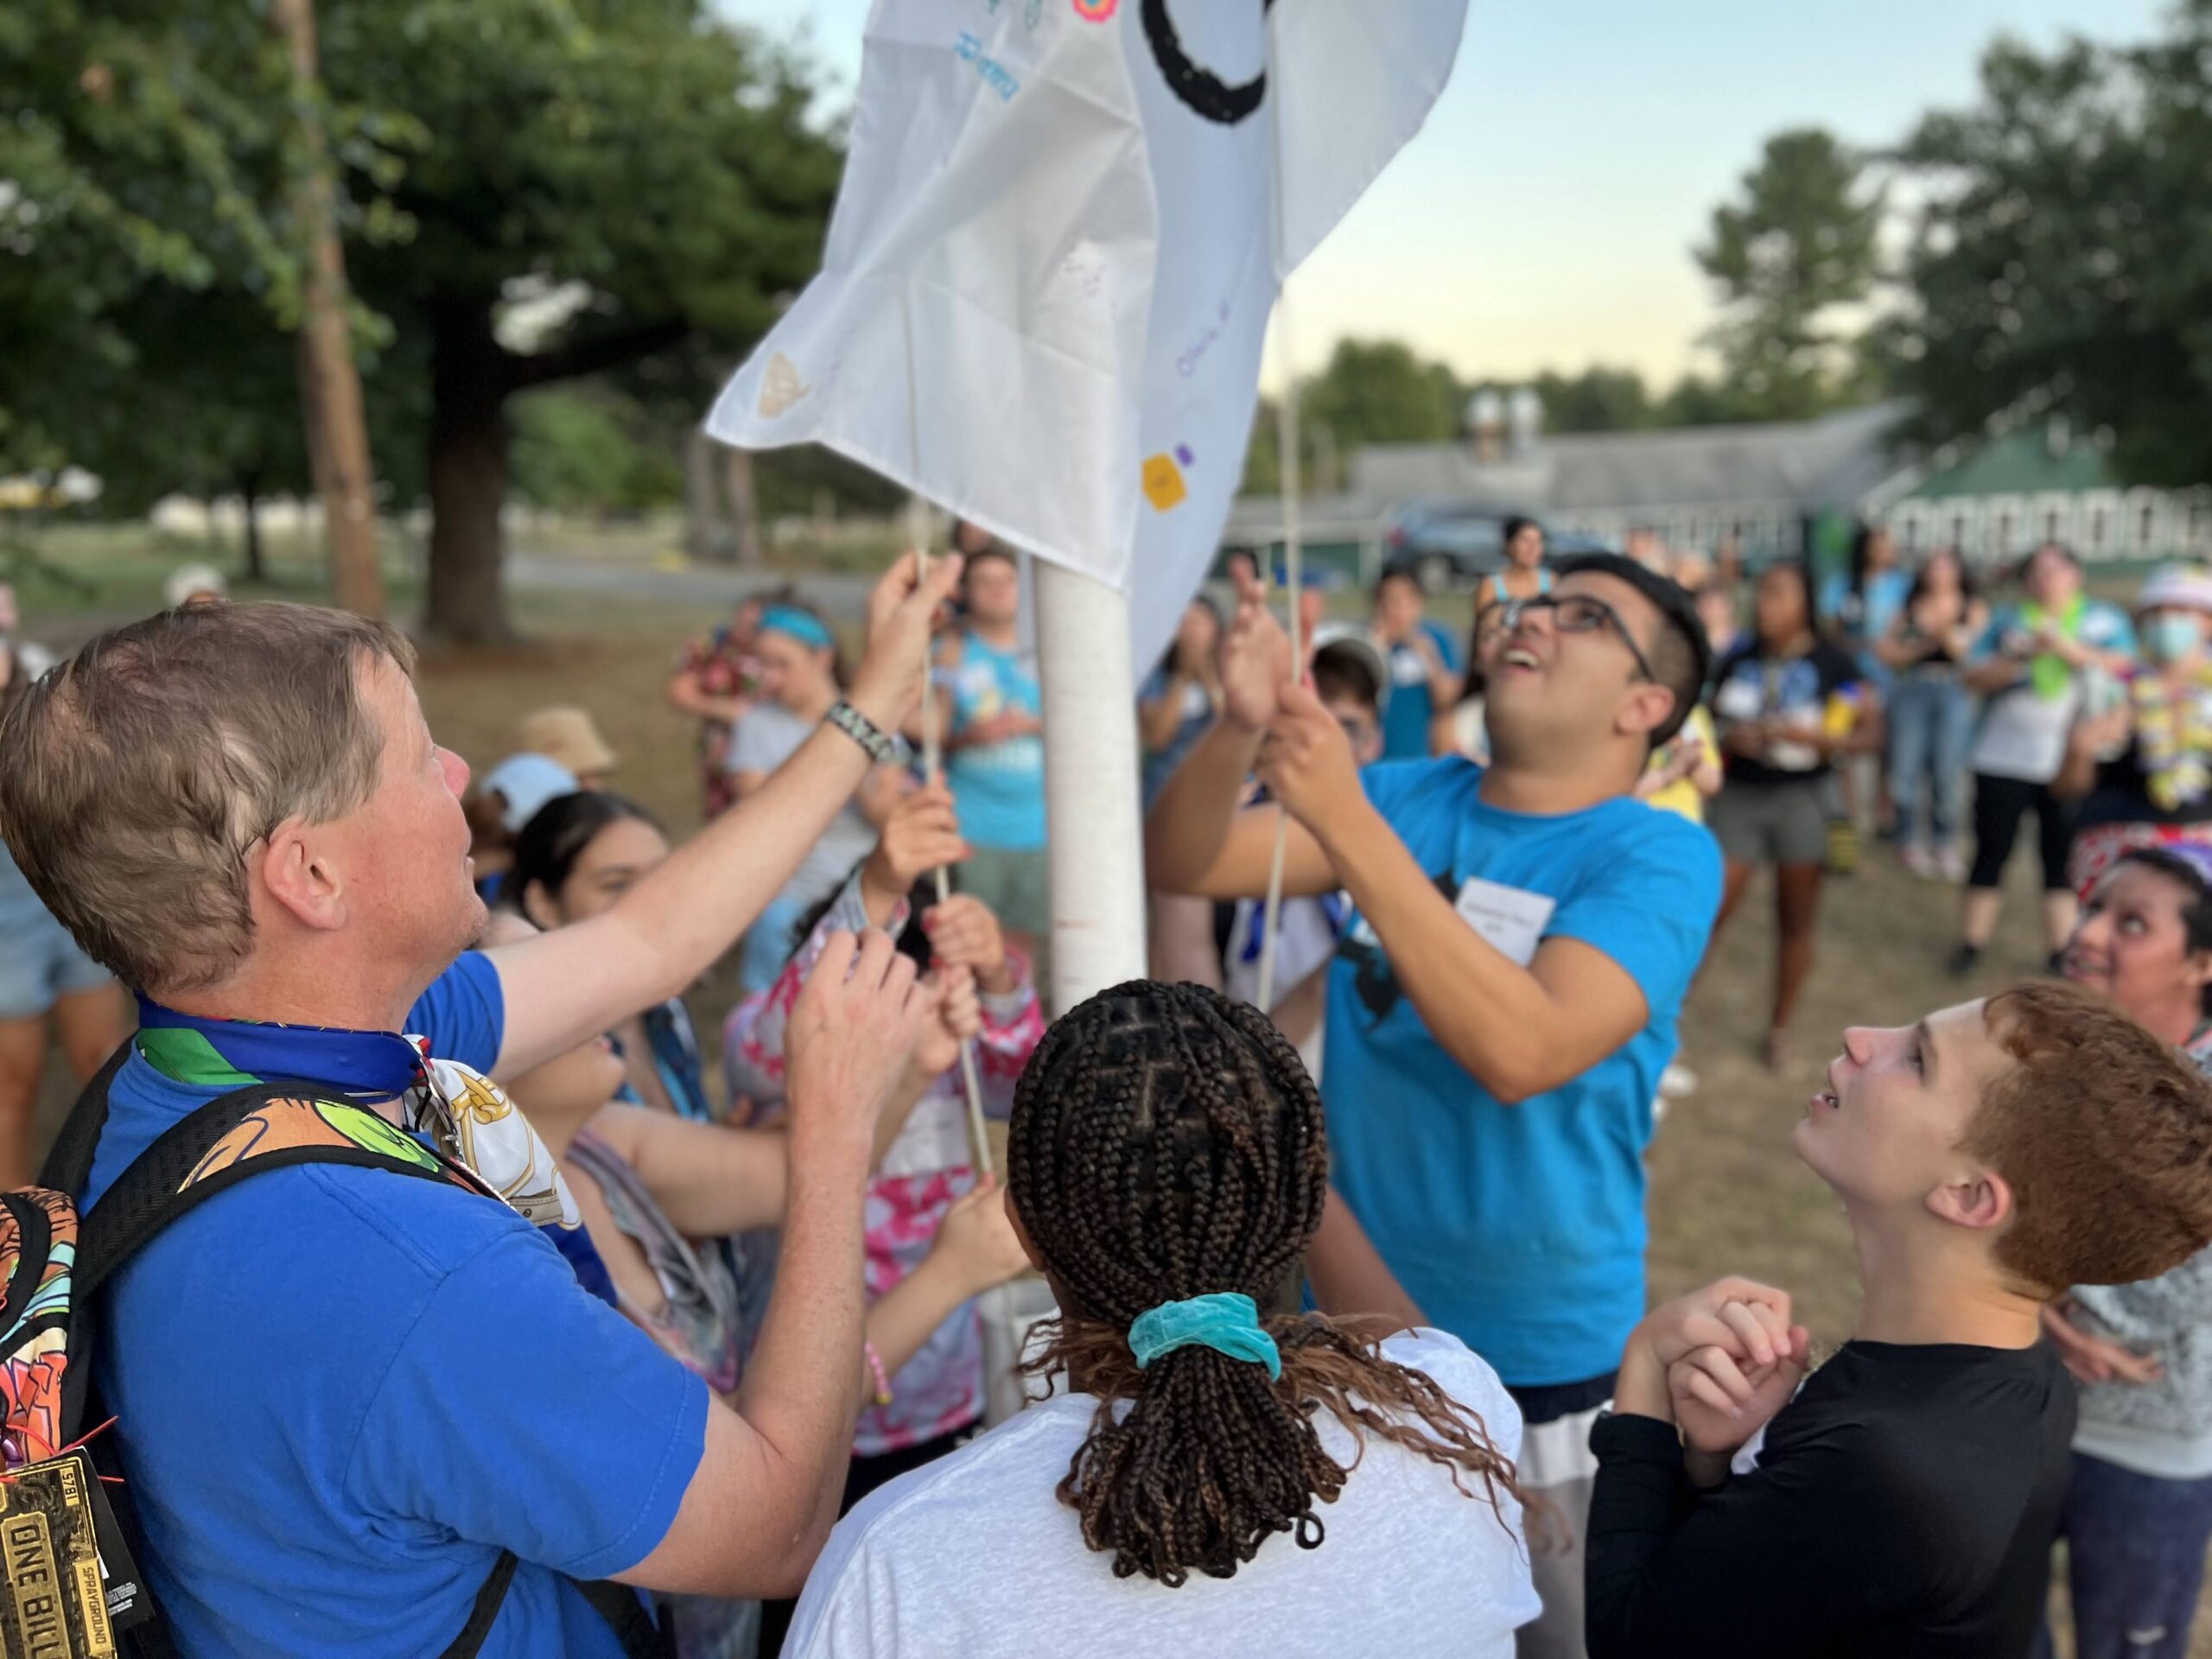 Male camper wearing blue shirt and glasses helping to raise camp flag alongside staff member, also wearing a blue shirt and abstract patterned backpack. 